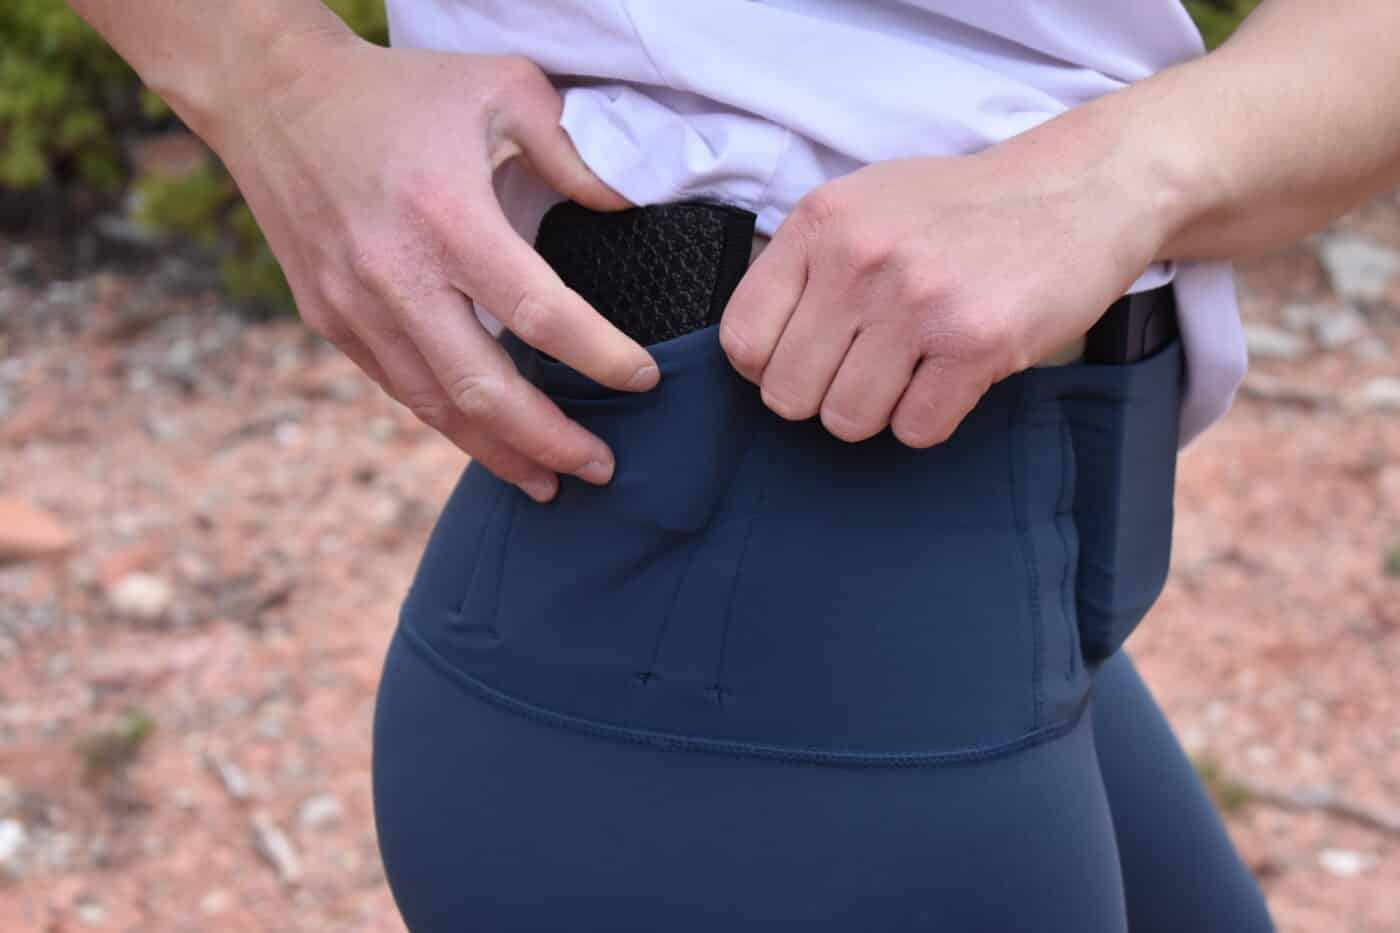 Placement of holster in Alexo Athletica leggings